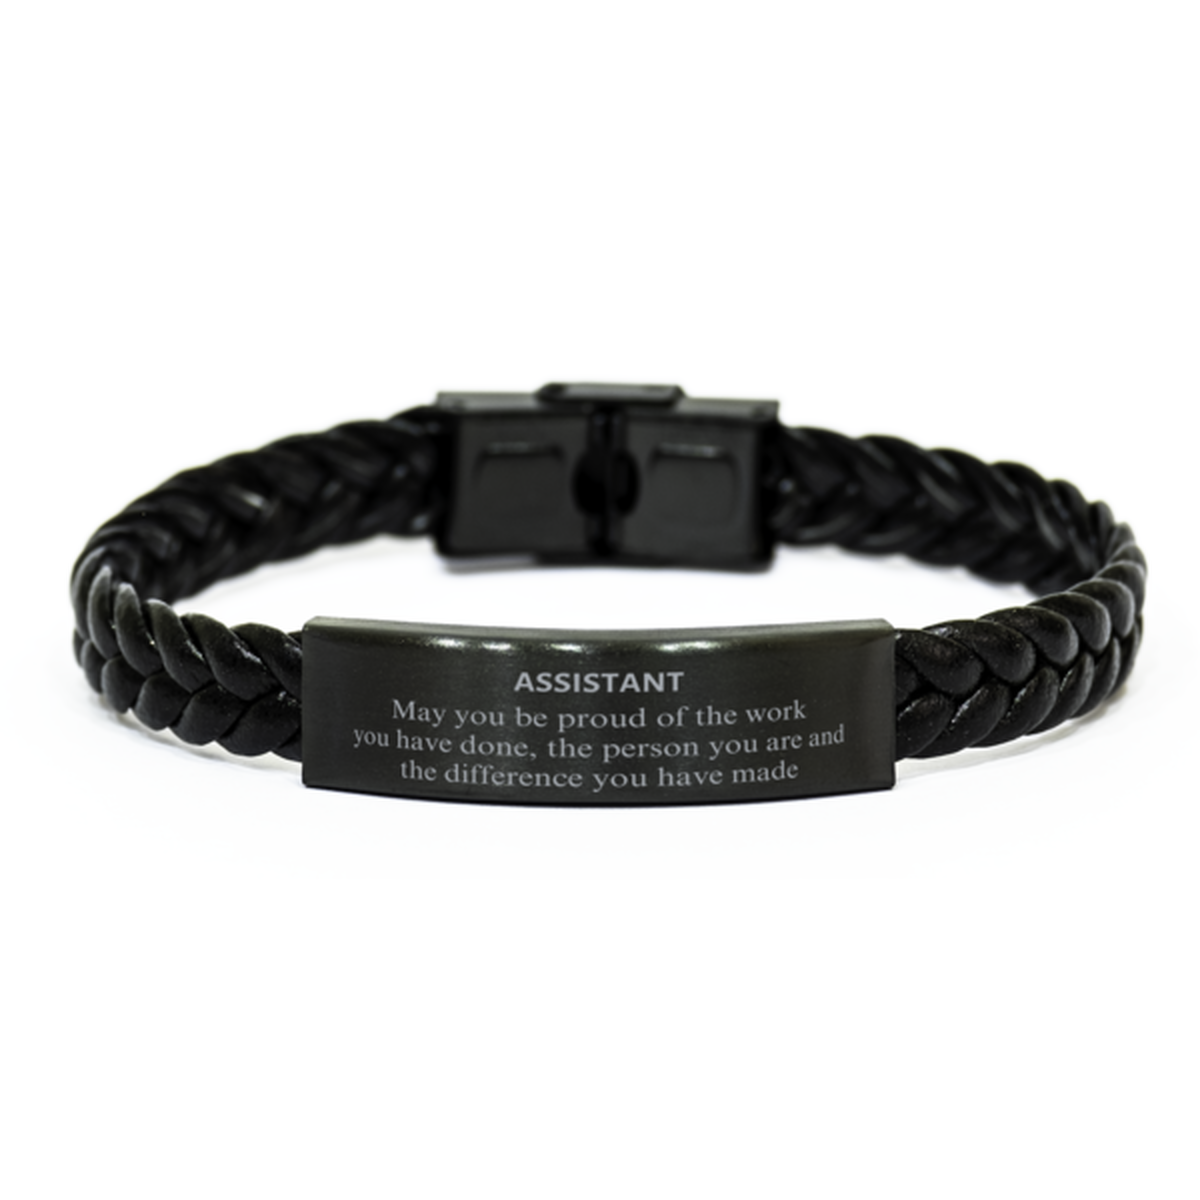 Assistant May you be proud of the work you have done, Retirement Assistant Braided Leather Bracelet for Colleague Appreciation Gifts Amazing for Assistant